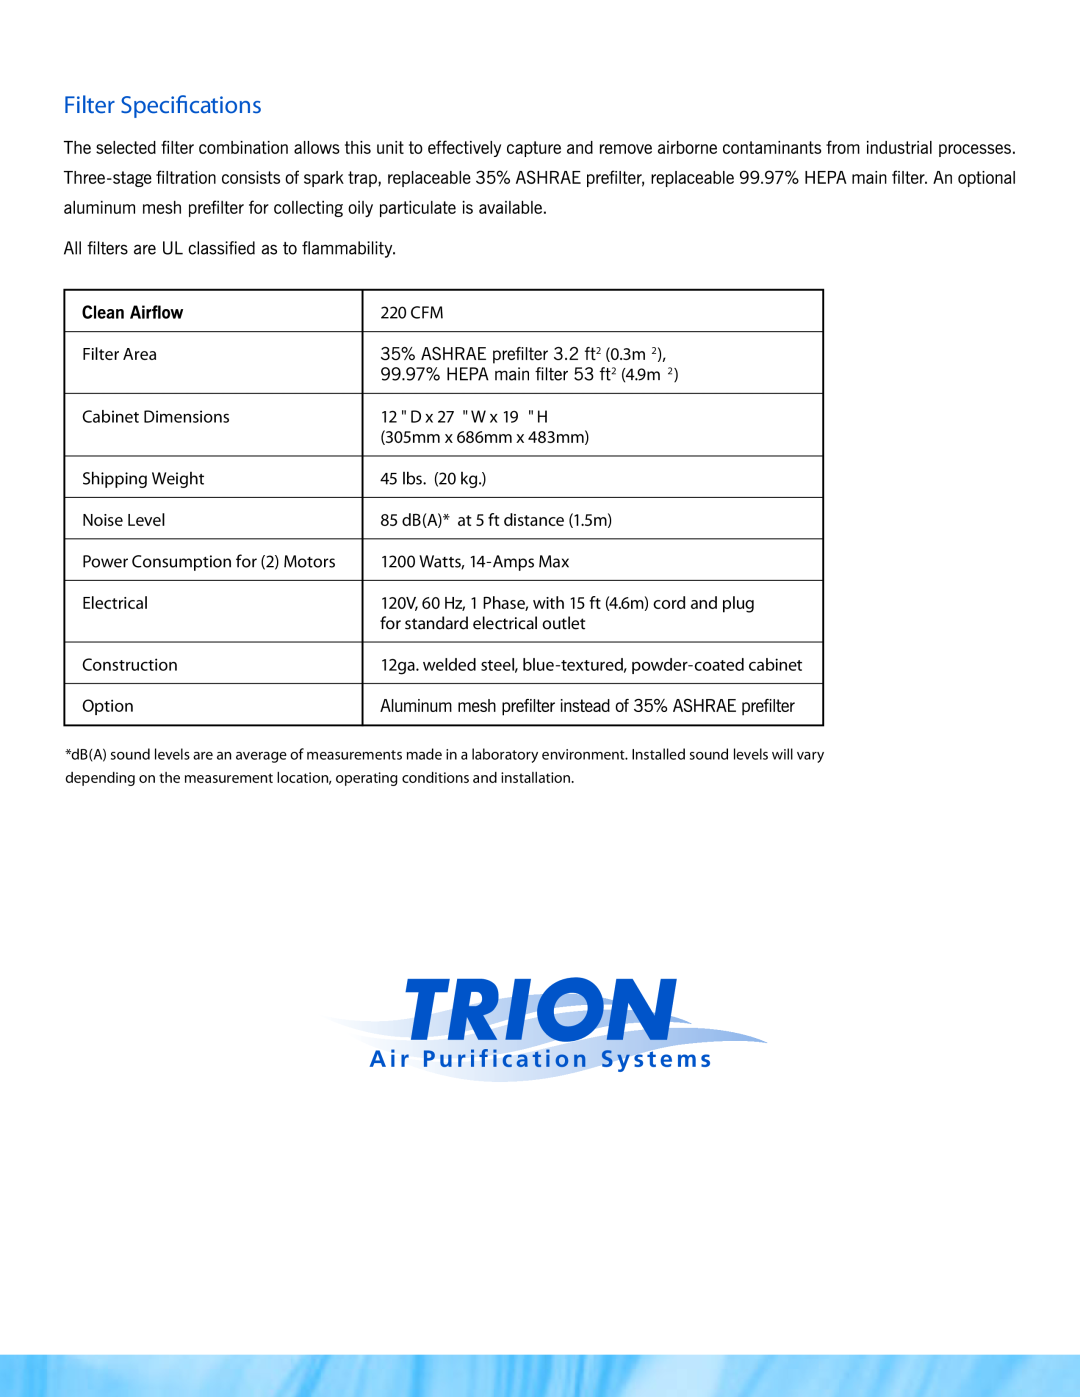 Trion Air Boss One Man Portable Filter Specications, A i r P u r i f i c a t i o n S y s t e m s, Filter Area, Noise Level 